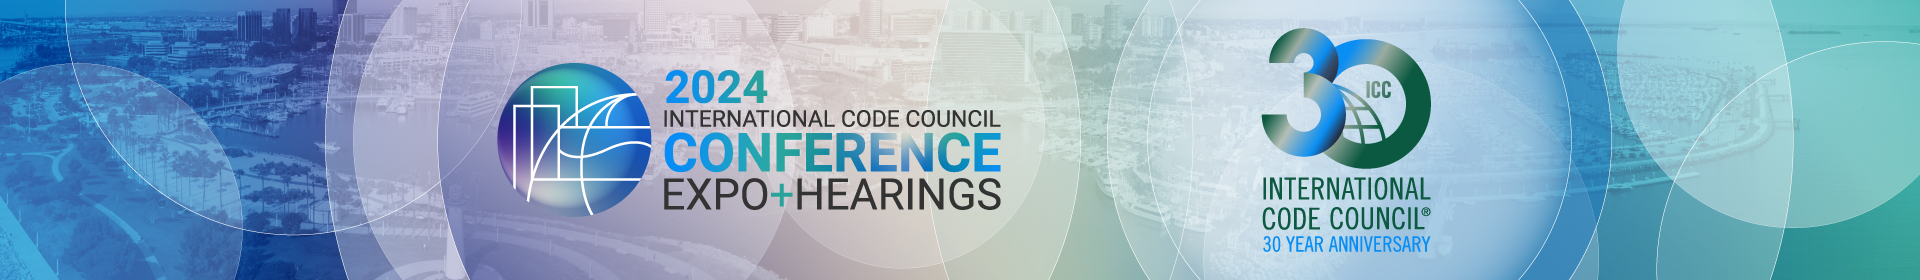 ICC 2024 Annual Conference, Expo and Committee Action Hearings Event Banner